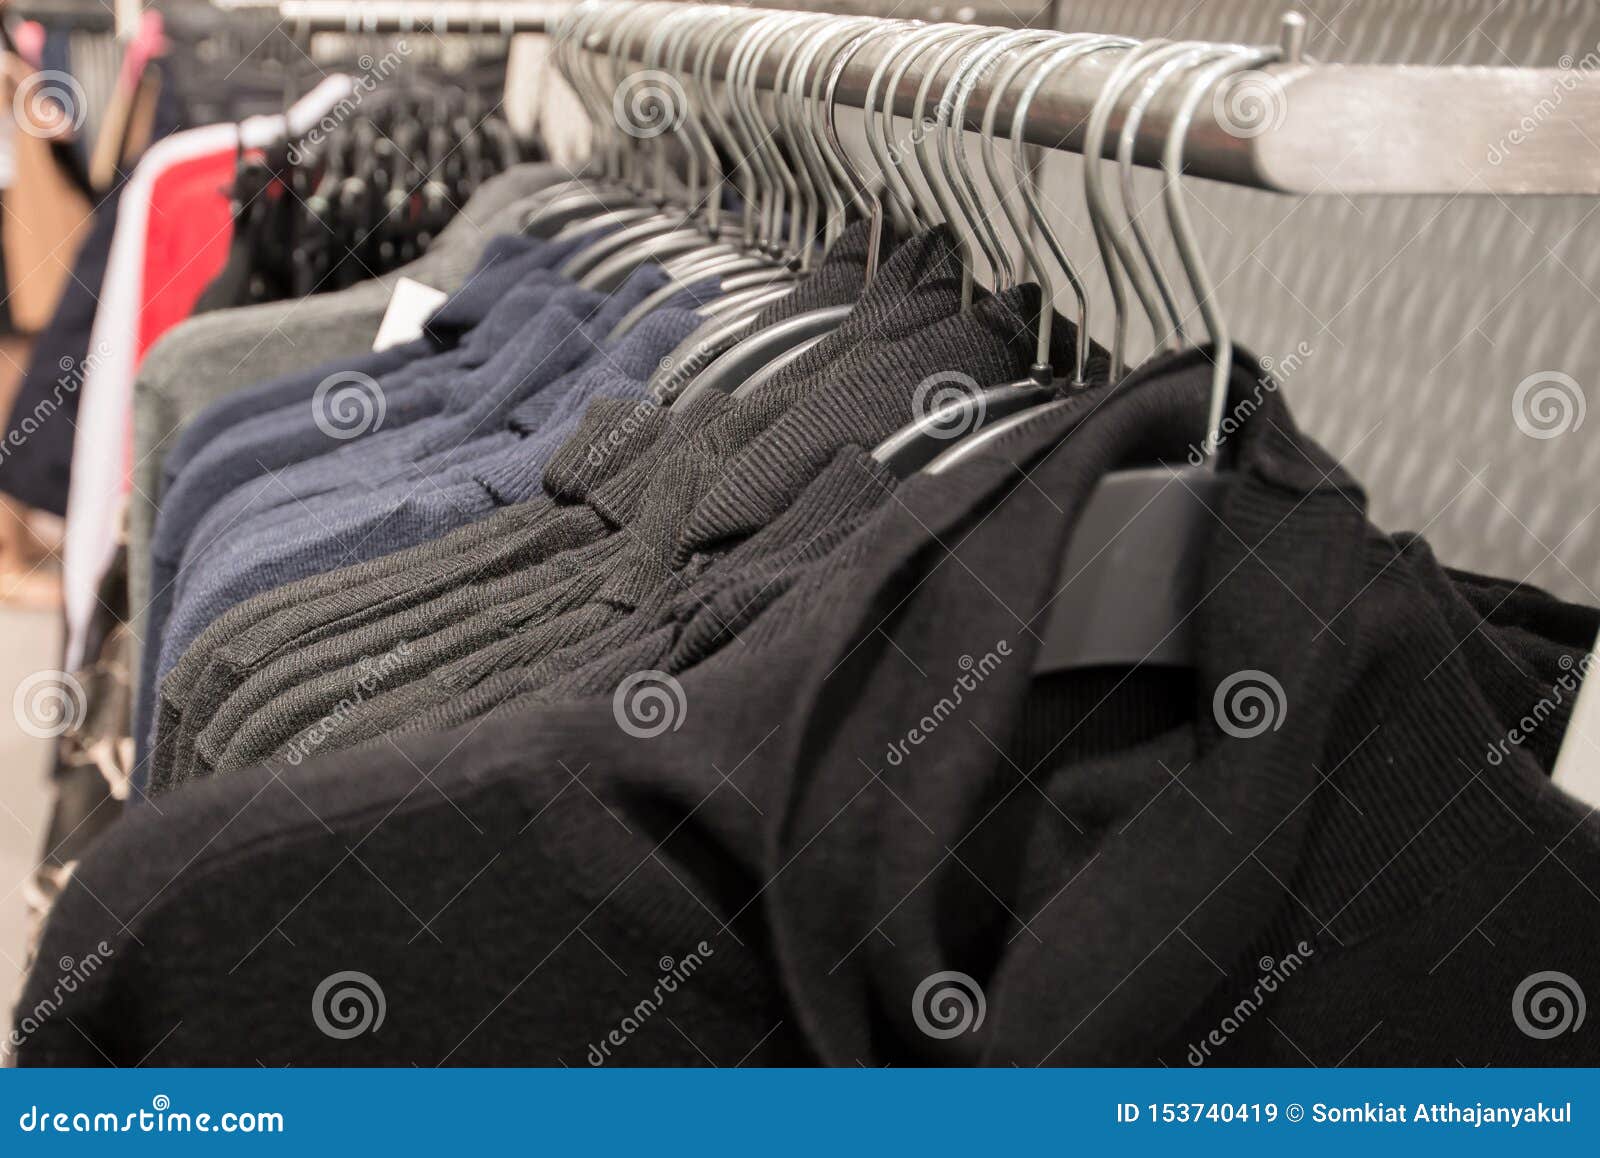 Clothes Hanger Showcase in Store. Stock Image - Image of collection ...